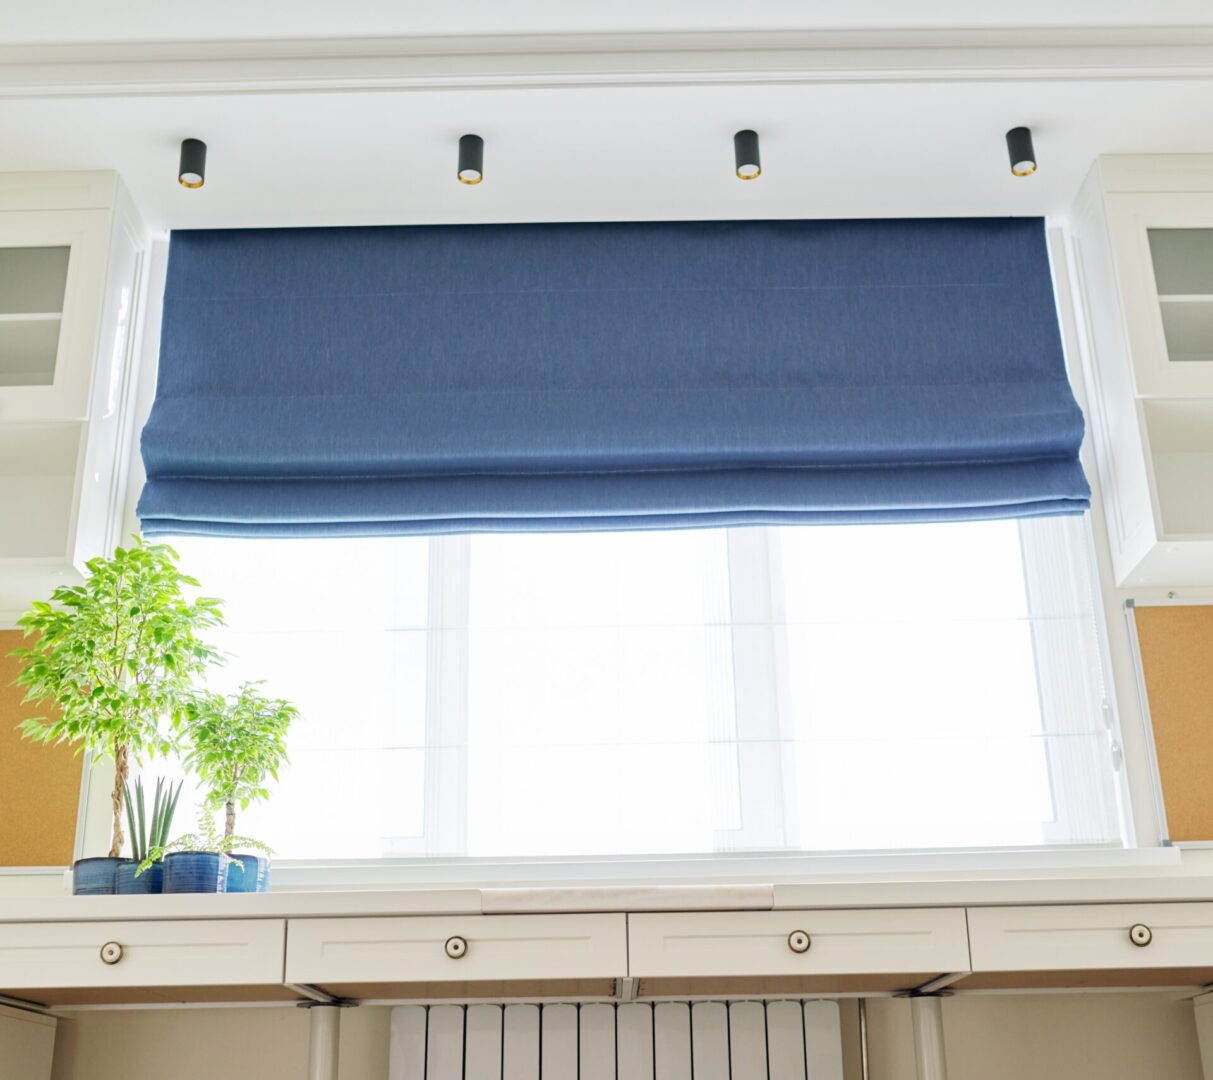 Roman blind in the interior detail close-up. Curtain blue blackout fabric, sheers white linen, fashionable modern window decoration design at home